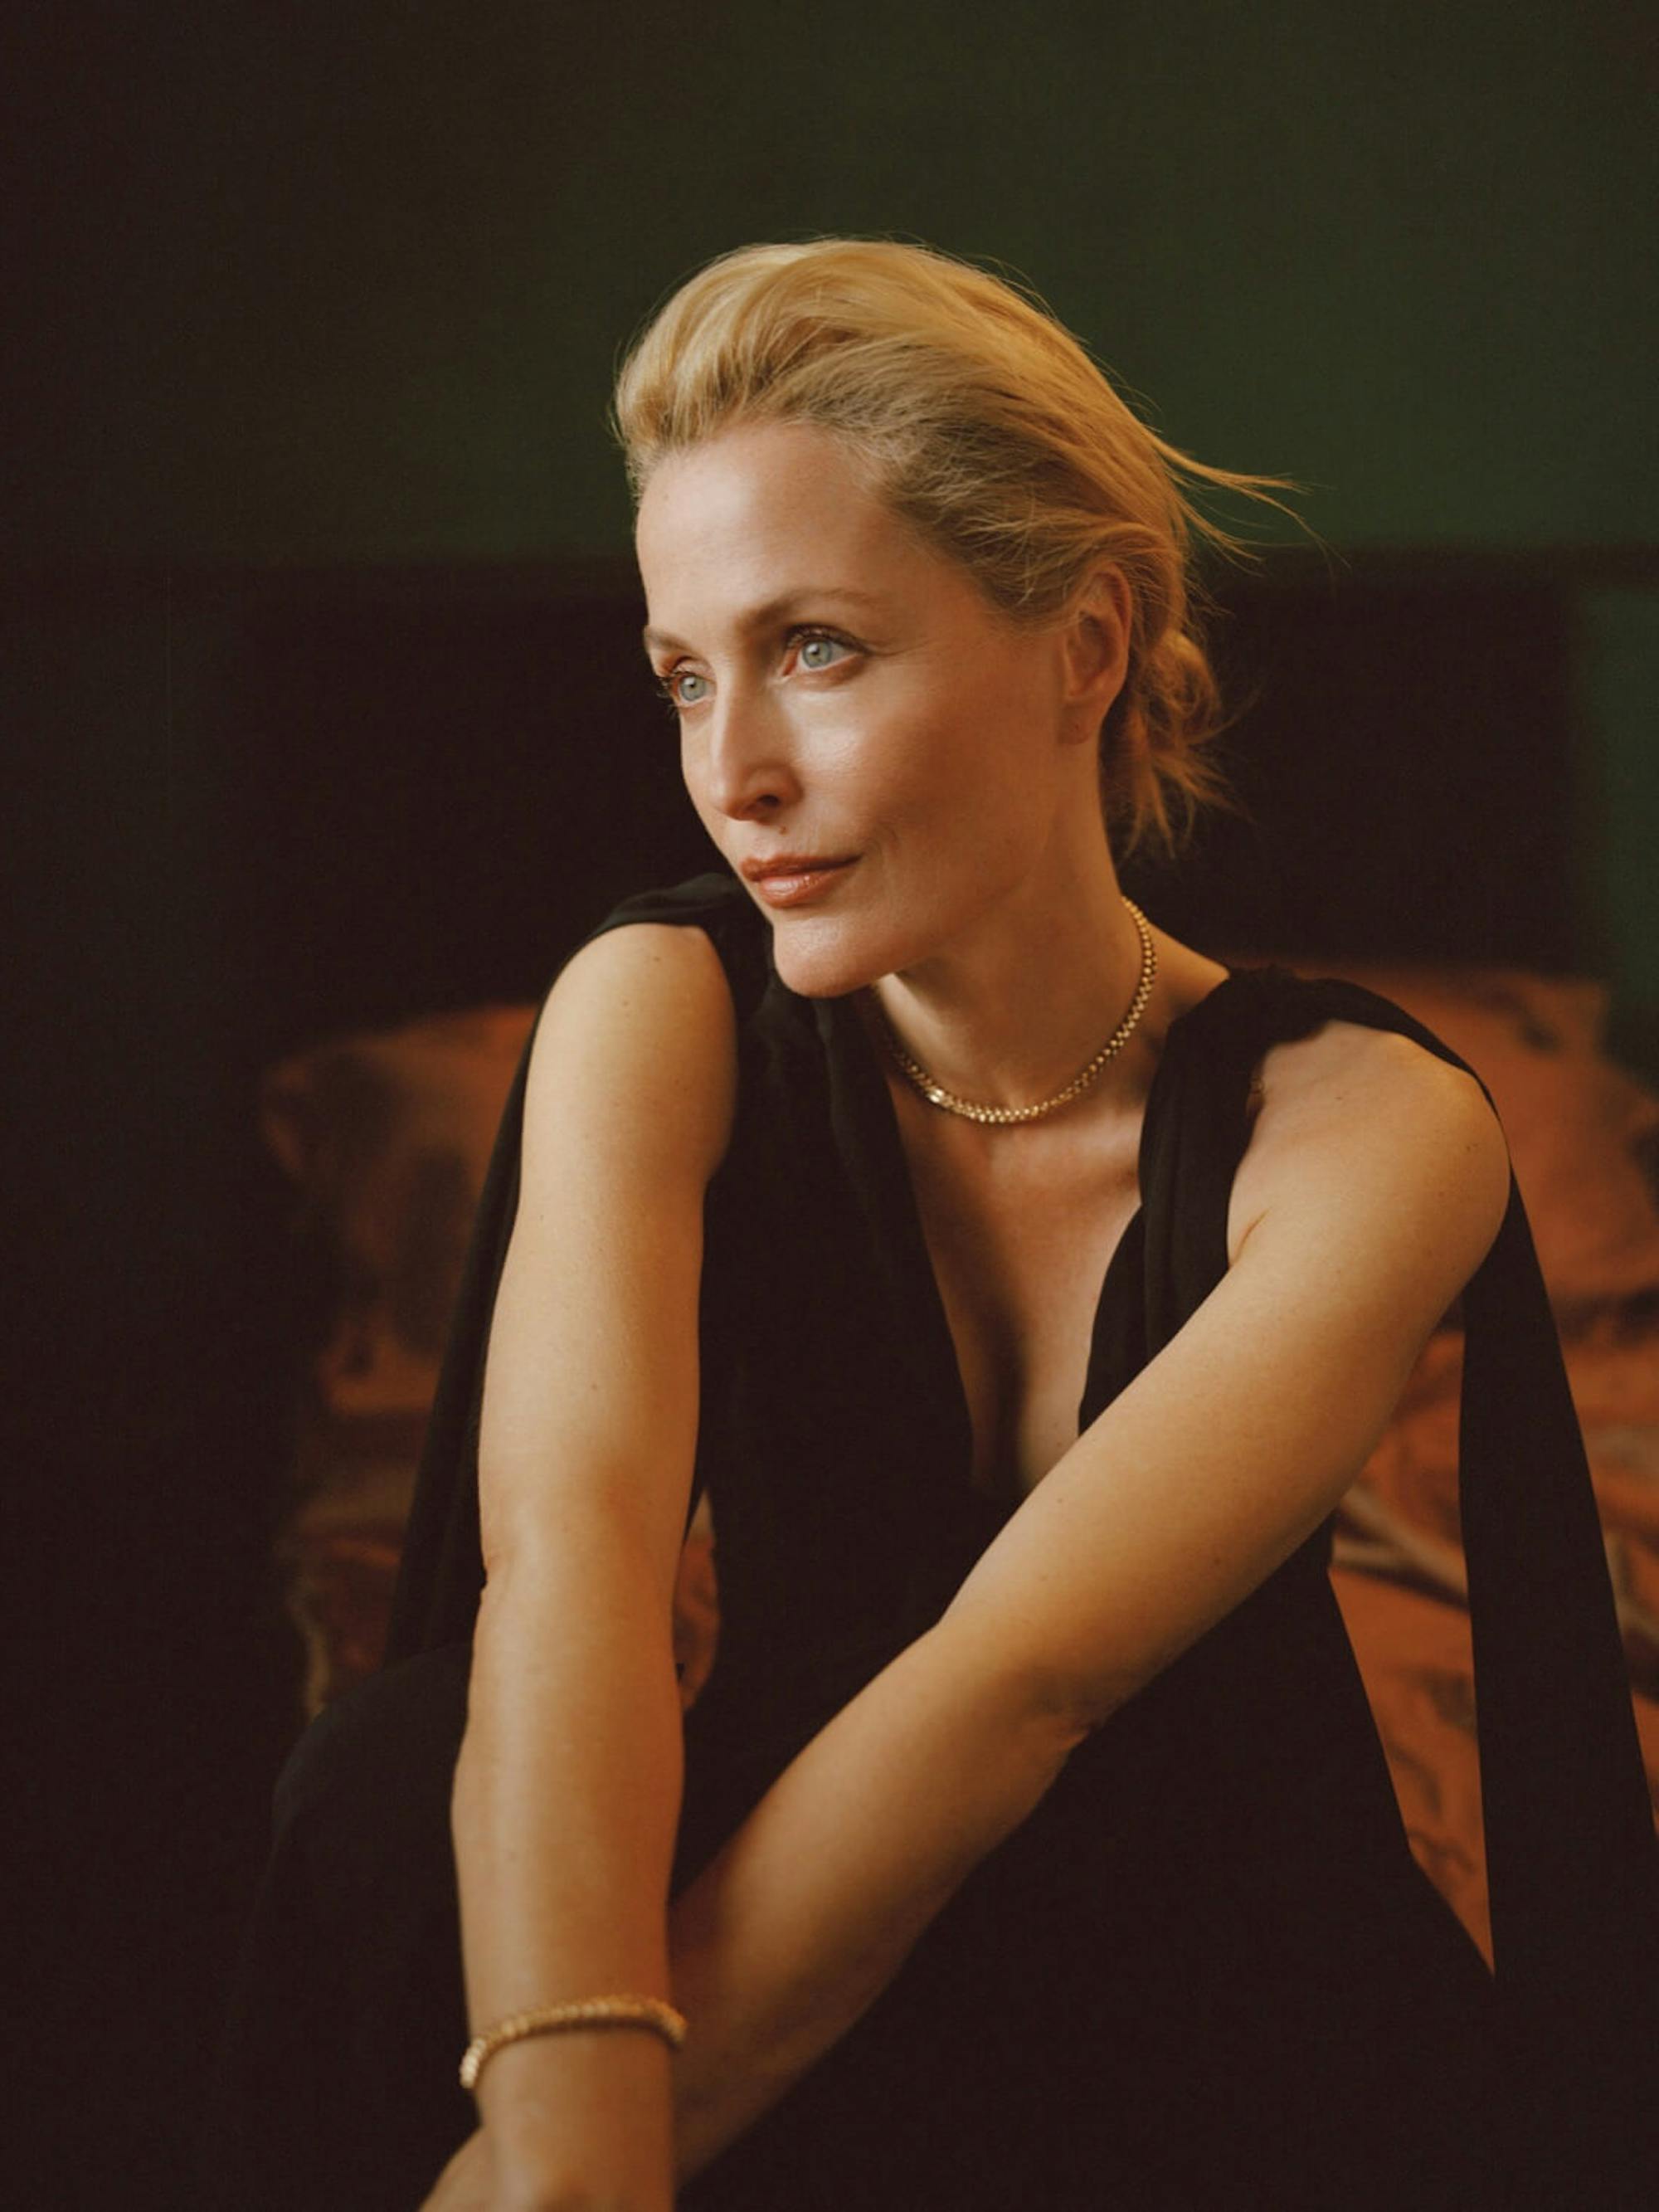 Gillian Anderson wears a black top and crosses her arms. Her wrists and neck are adorned with gold jewelry.